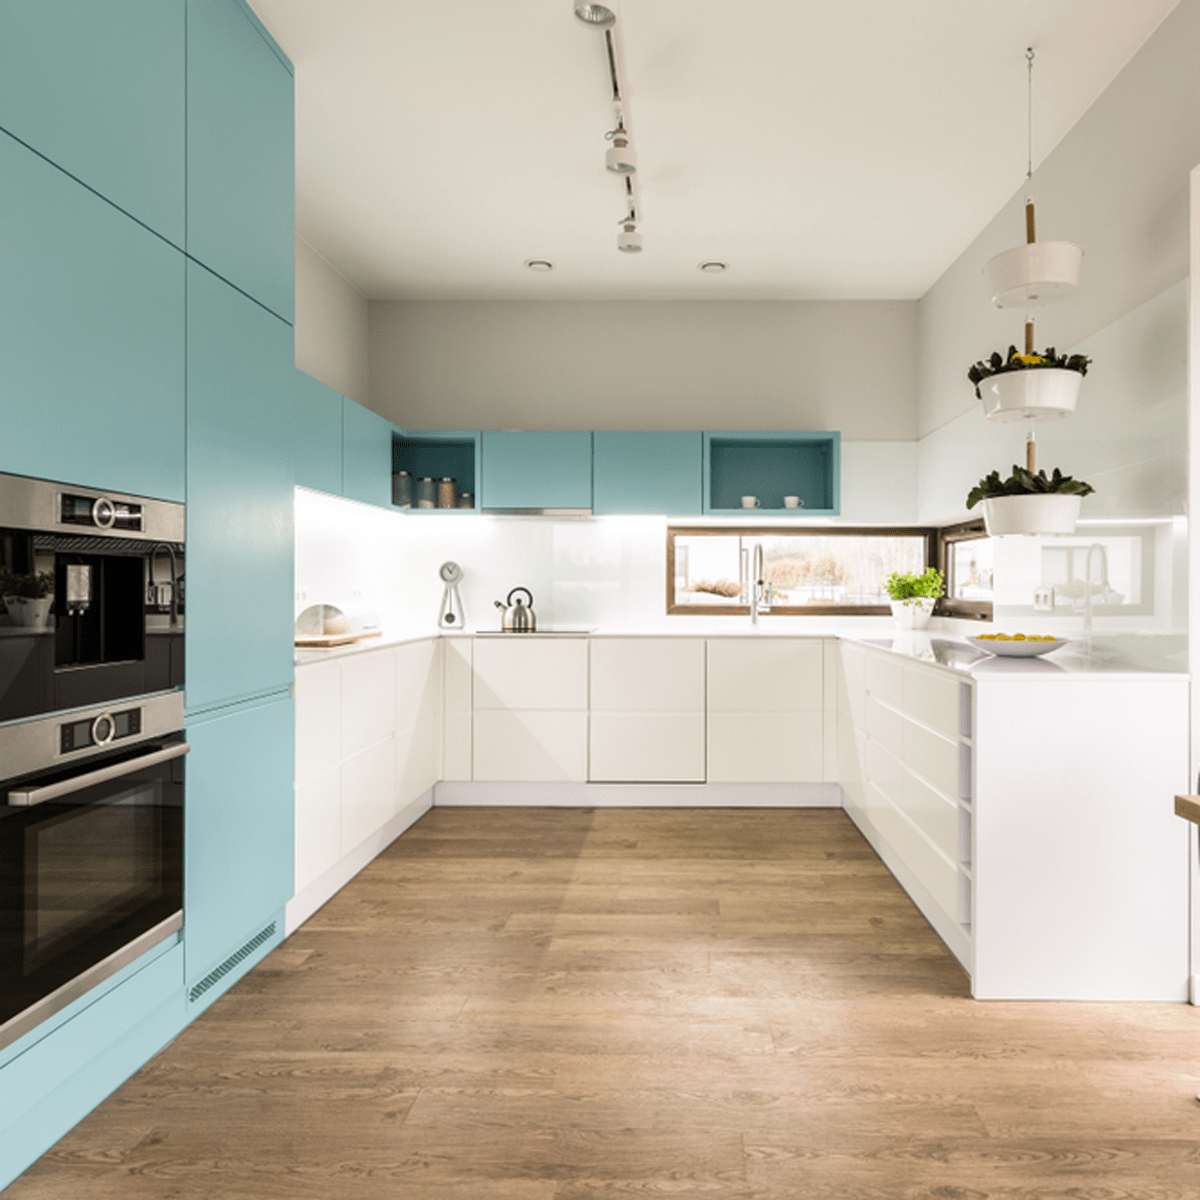 10 Kitchen Cabinetry Trends The Latest Kitchen Trends To Embrace